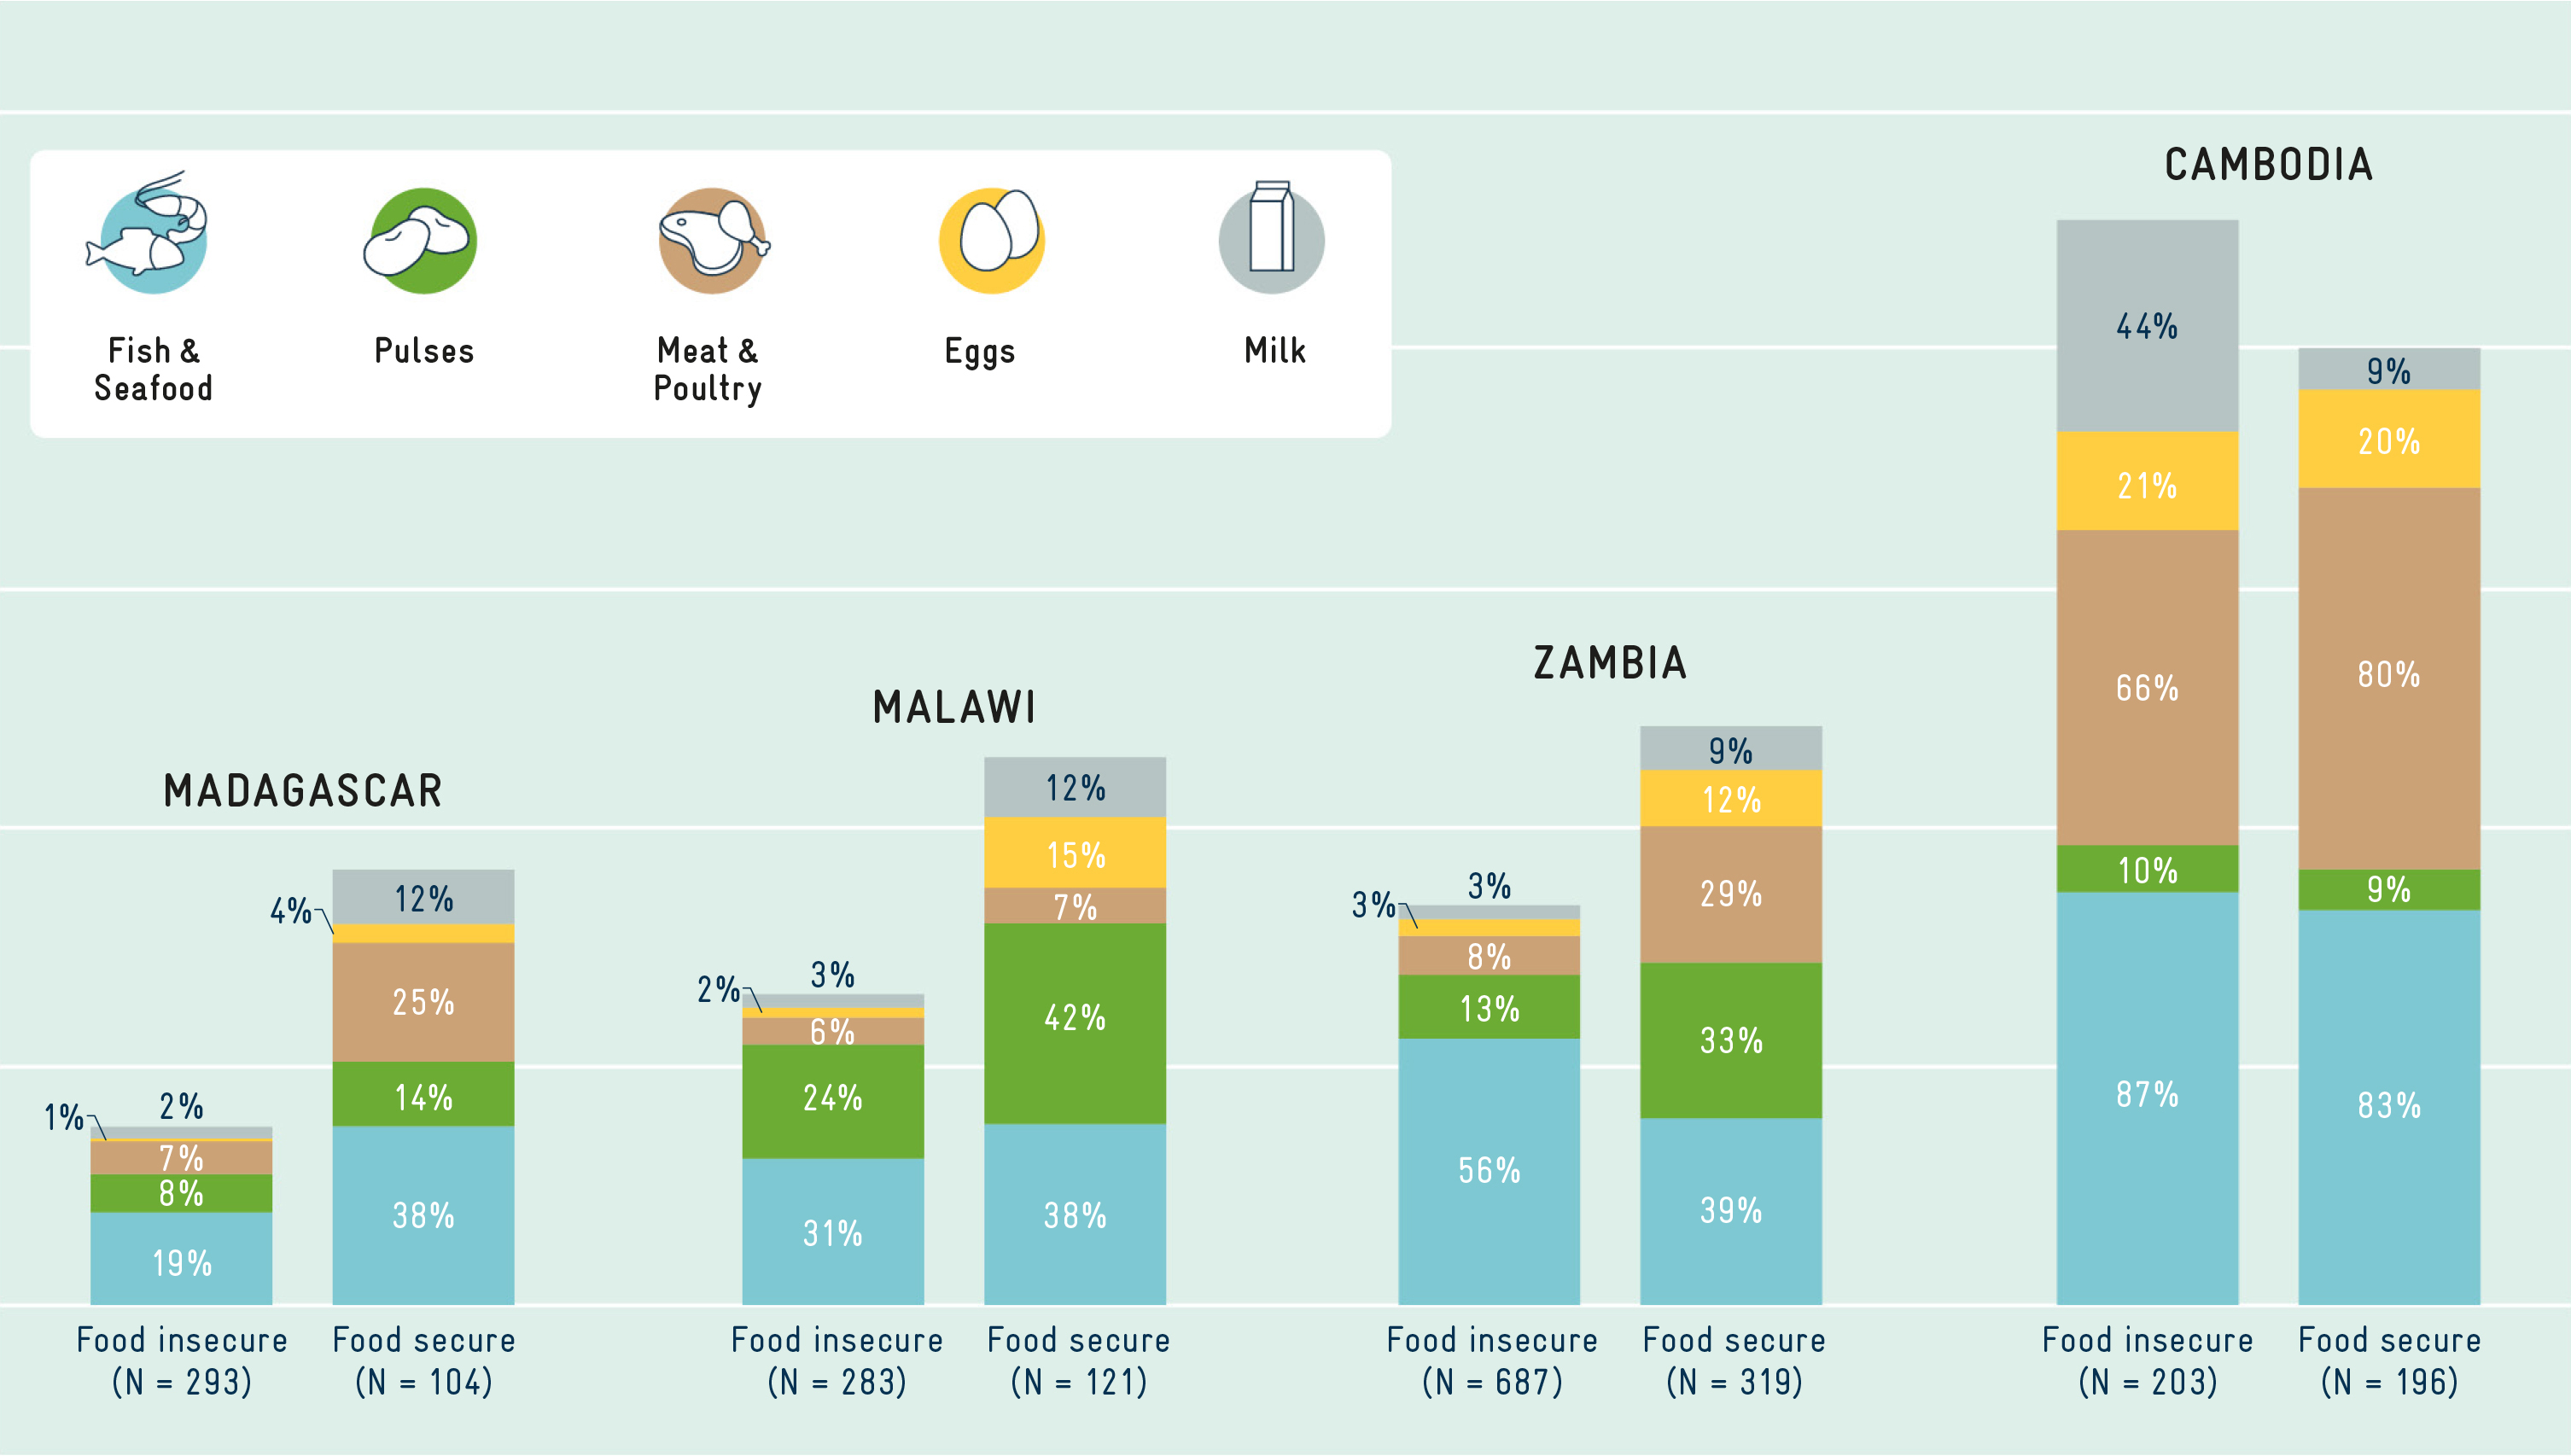 For each country the numbers are distributed according to food security level (food insecure or food secure) and show the percentage of protein sources consumed (fish & seafood, pulses, meat & poutry, eggs, milk). In Madagascar, Malawi and Zambia, food secure people eat more protein sources. The interesting trends are mentioned in the text.